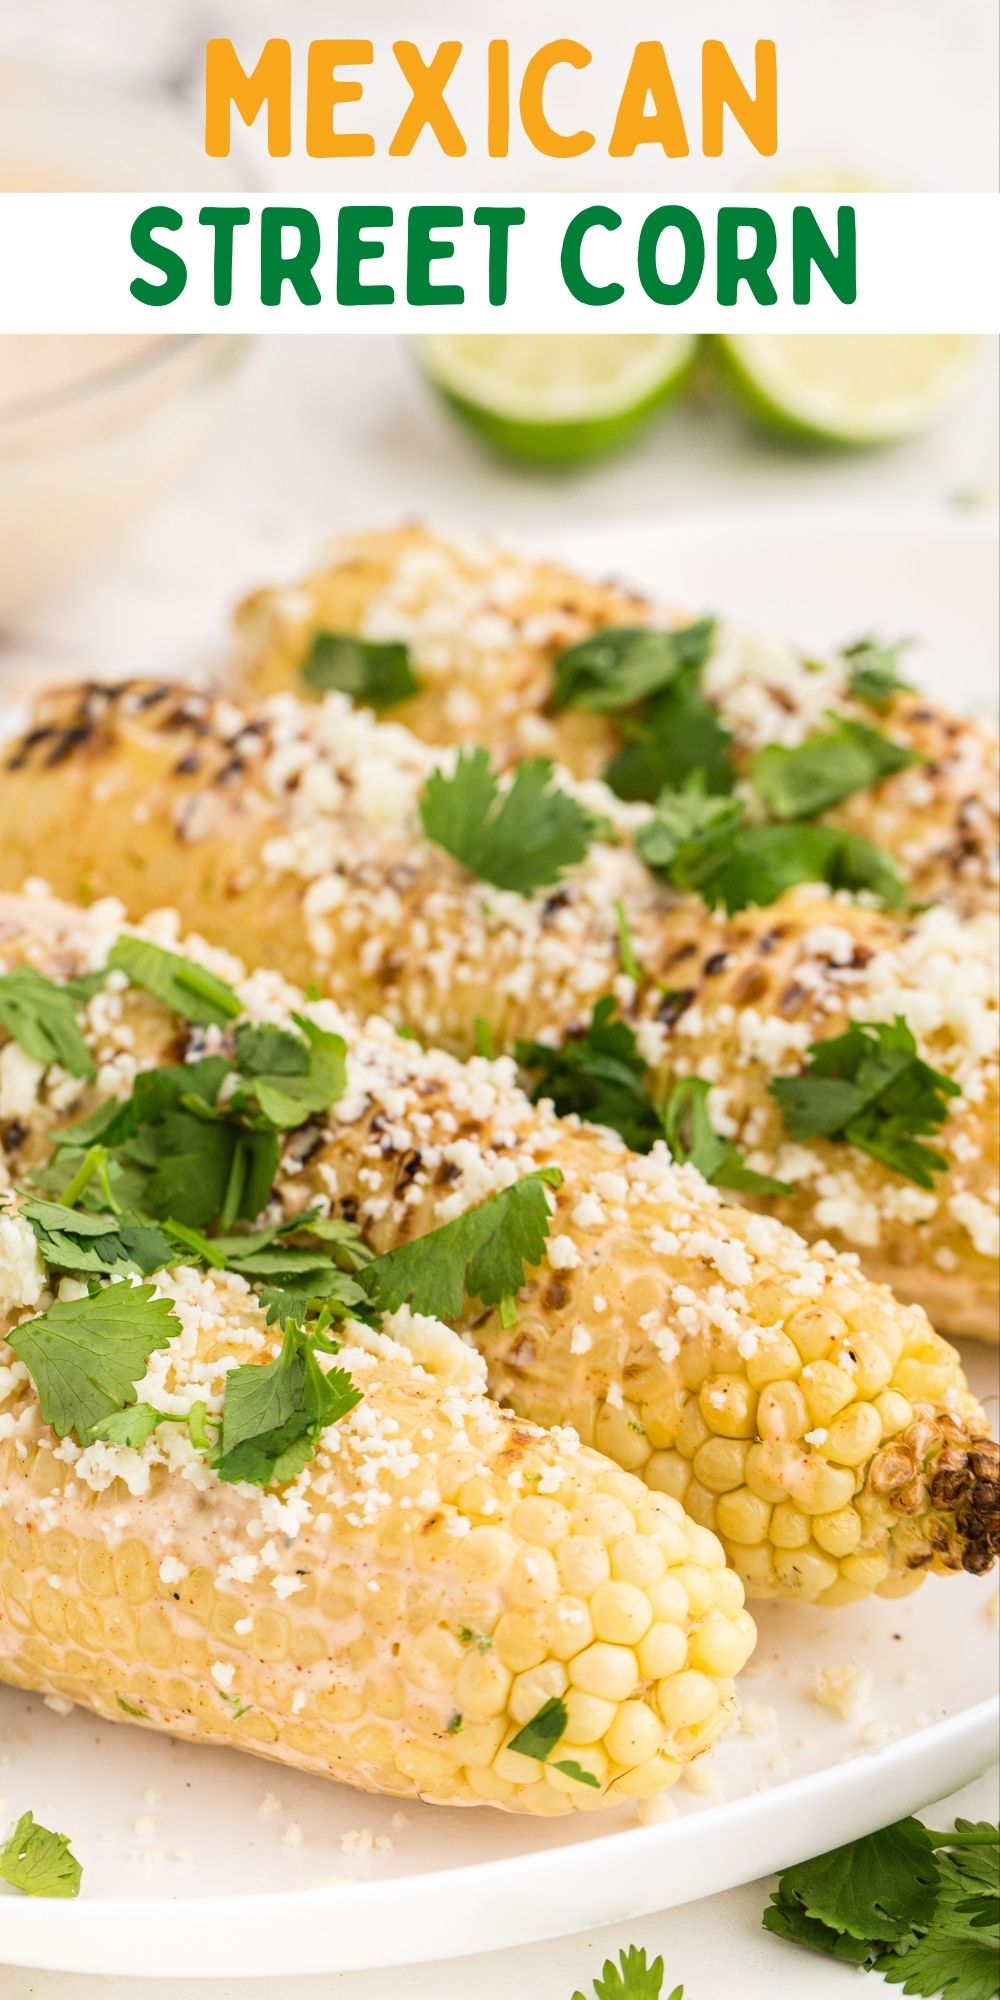 This corn is covered in a hot sauce, sprinkled with Cotija and fresh cilantro, they are like the complete Mexican Street Corn experience. via @familyfresh